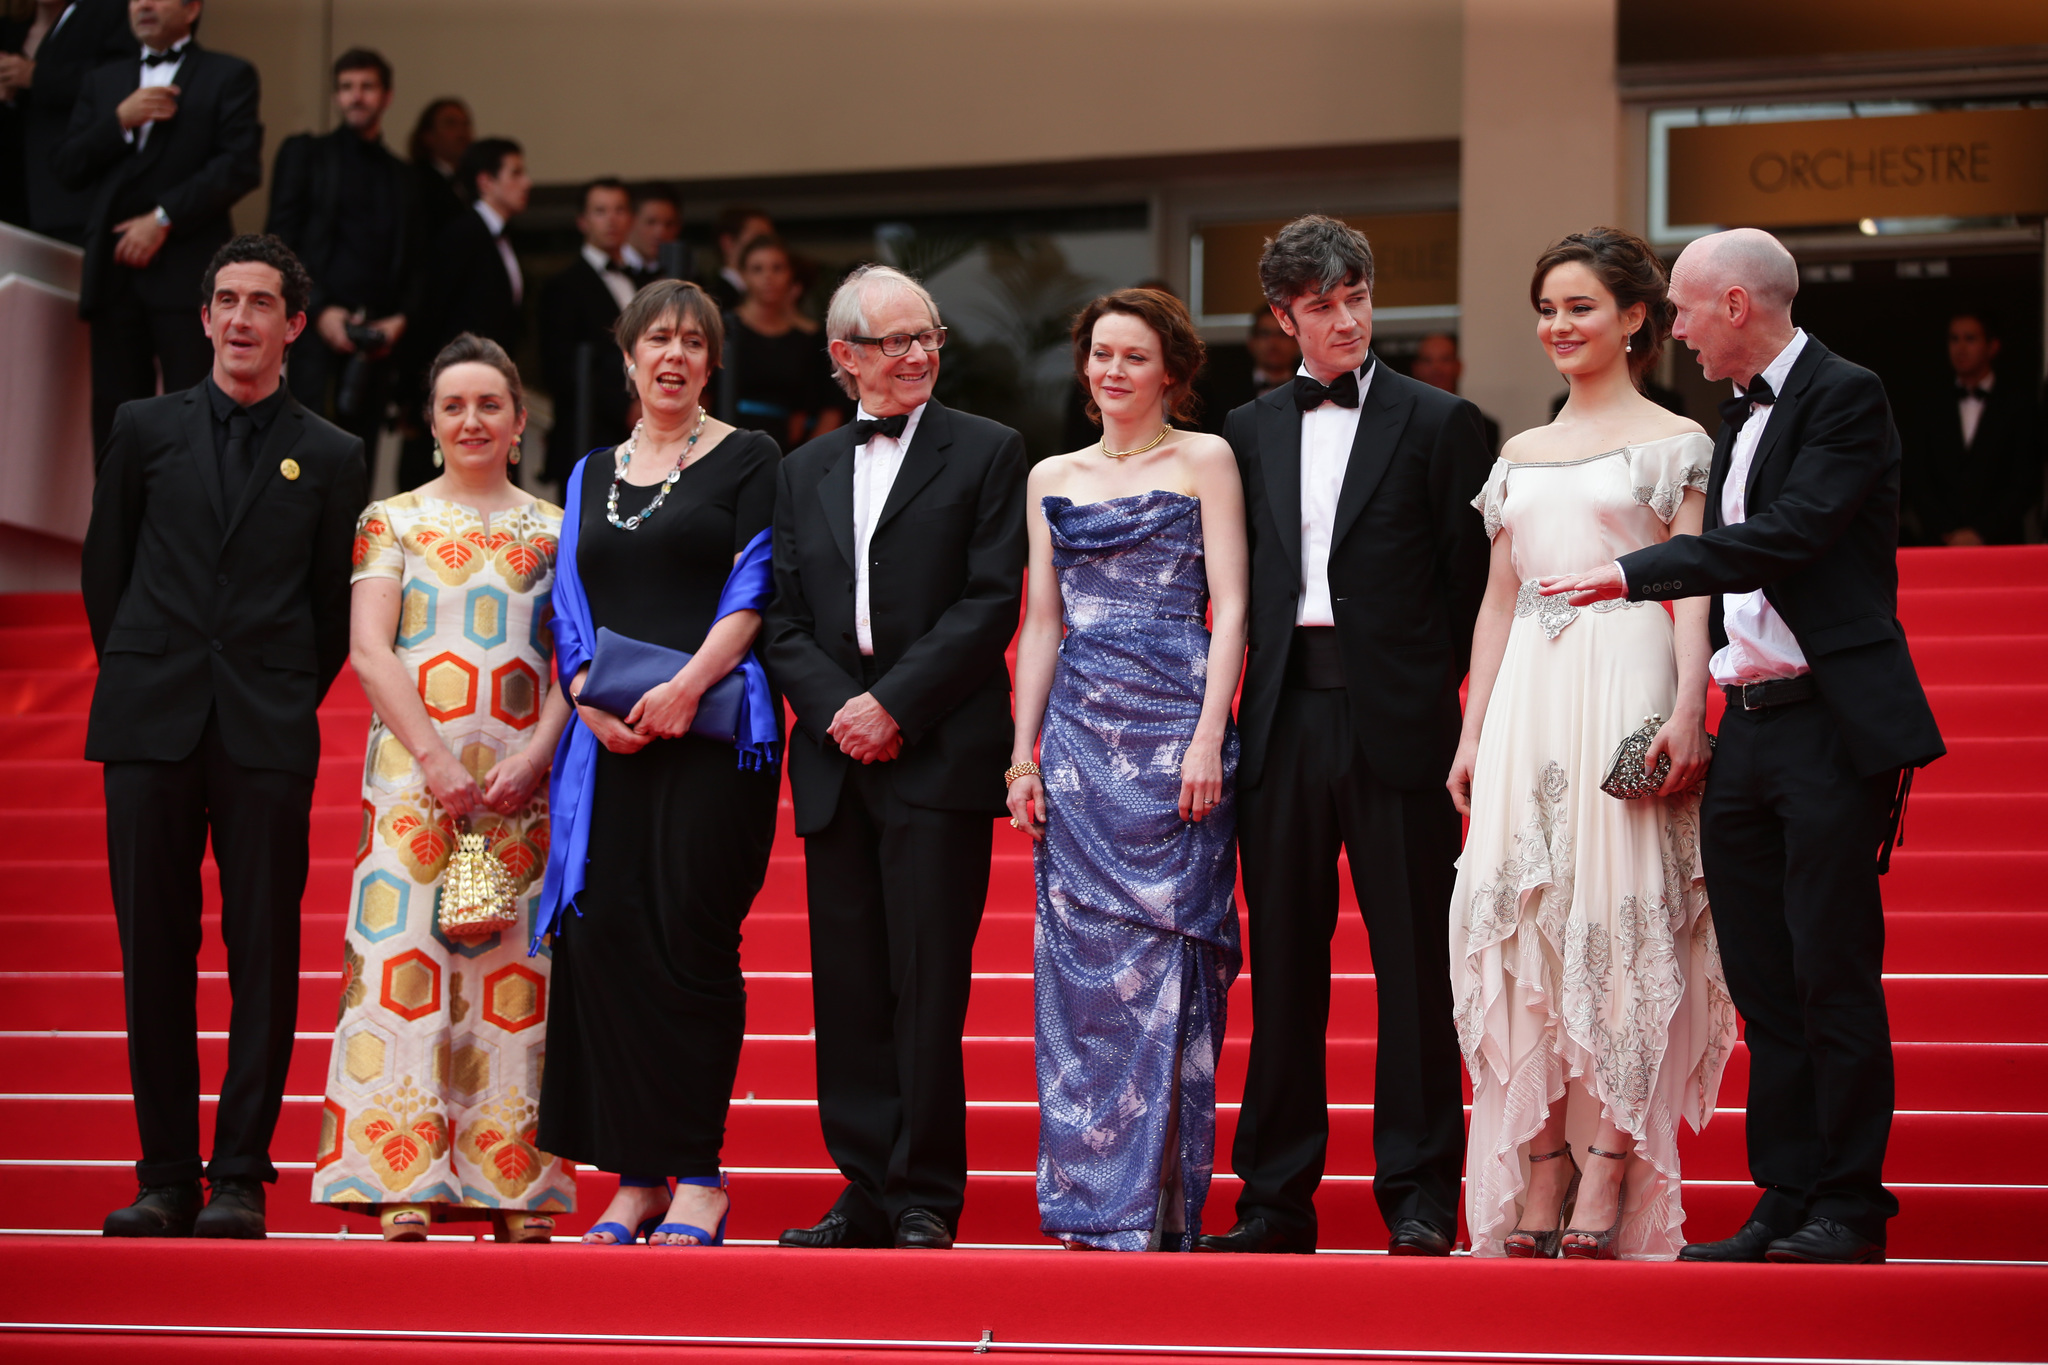 Paul Laverty, Ken Loach, Robbie Ryan, Barry Ward, Simone Kirby, Rebecca O'Brien and Aisling Franciosi at event of Jimmy's Hall (2014)